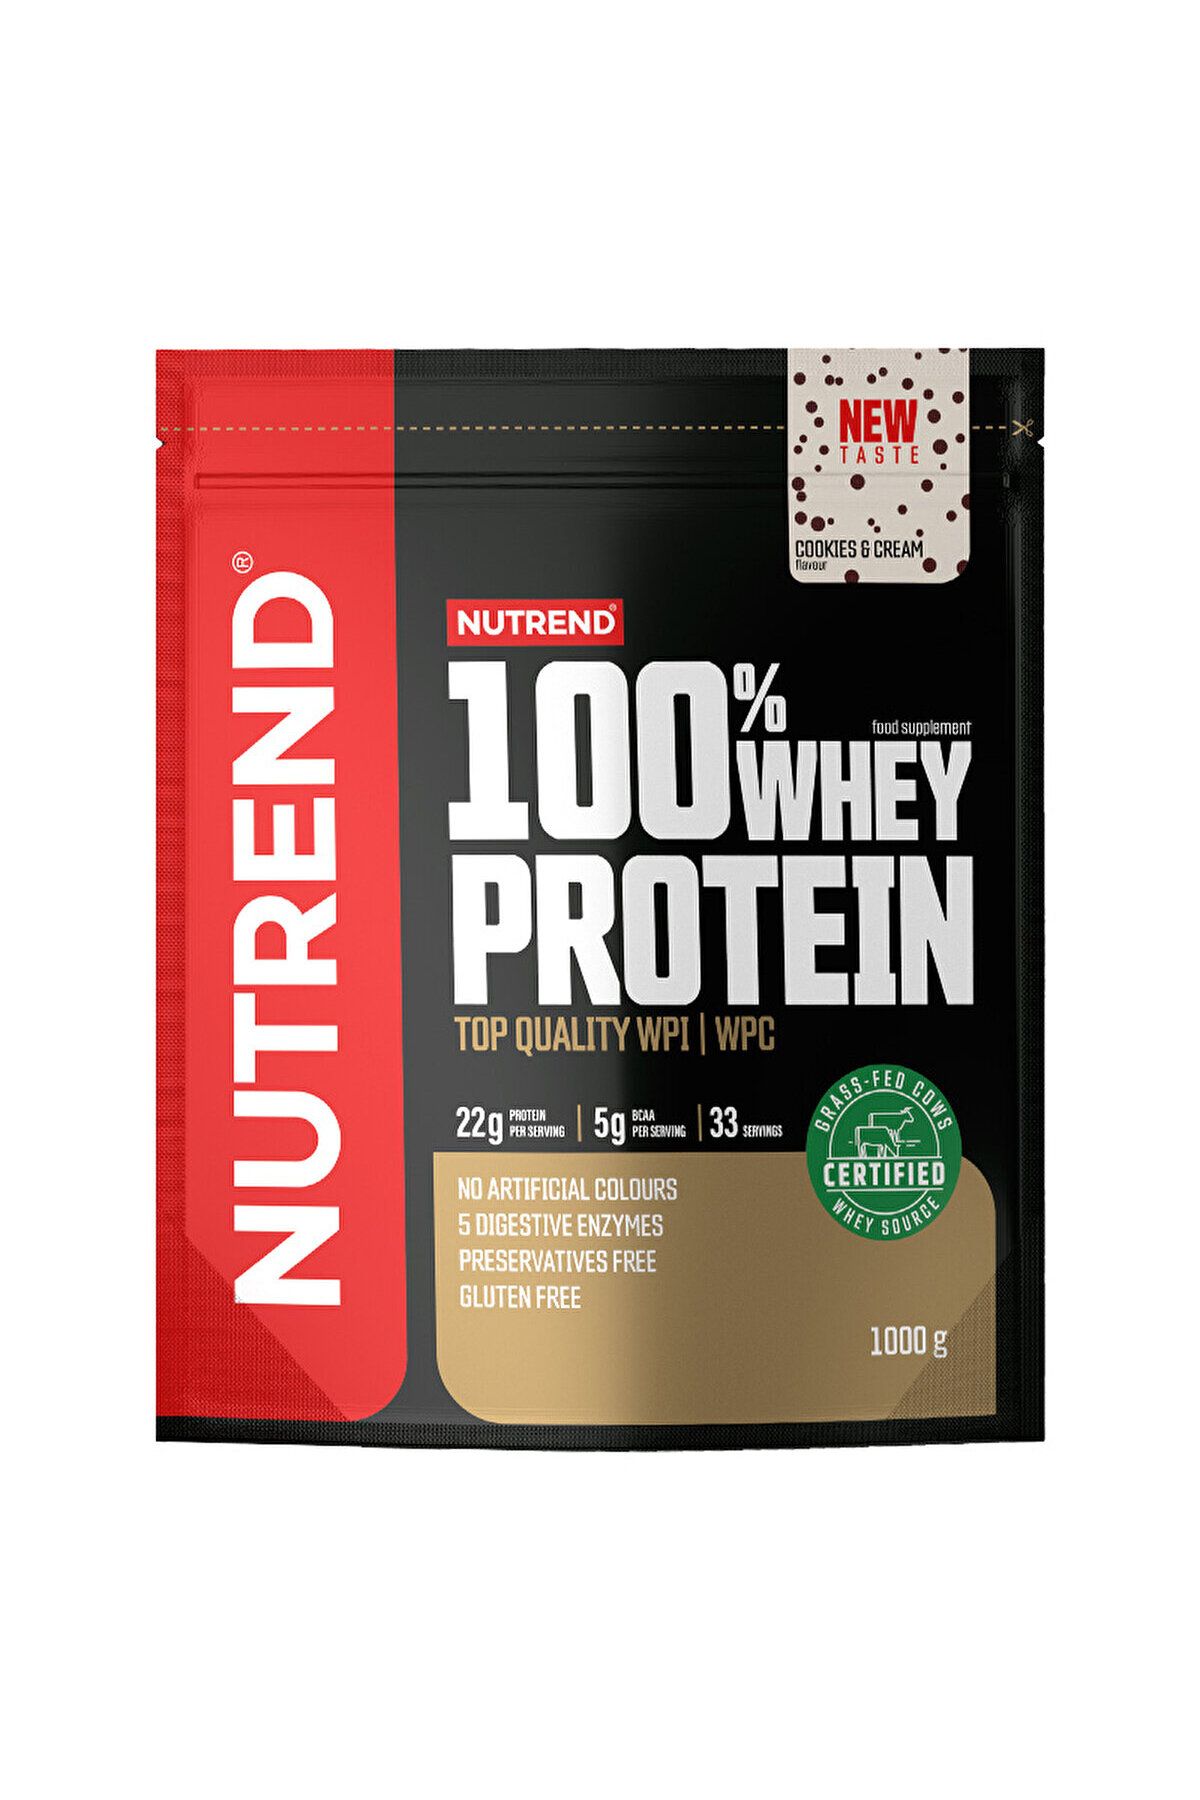 Nutrend Whey Protein - Cookies & Cream1000g 1